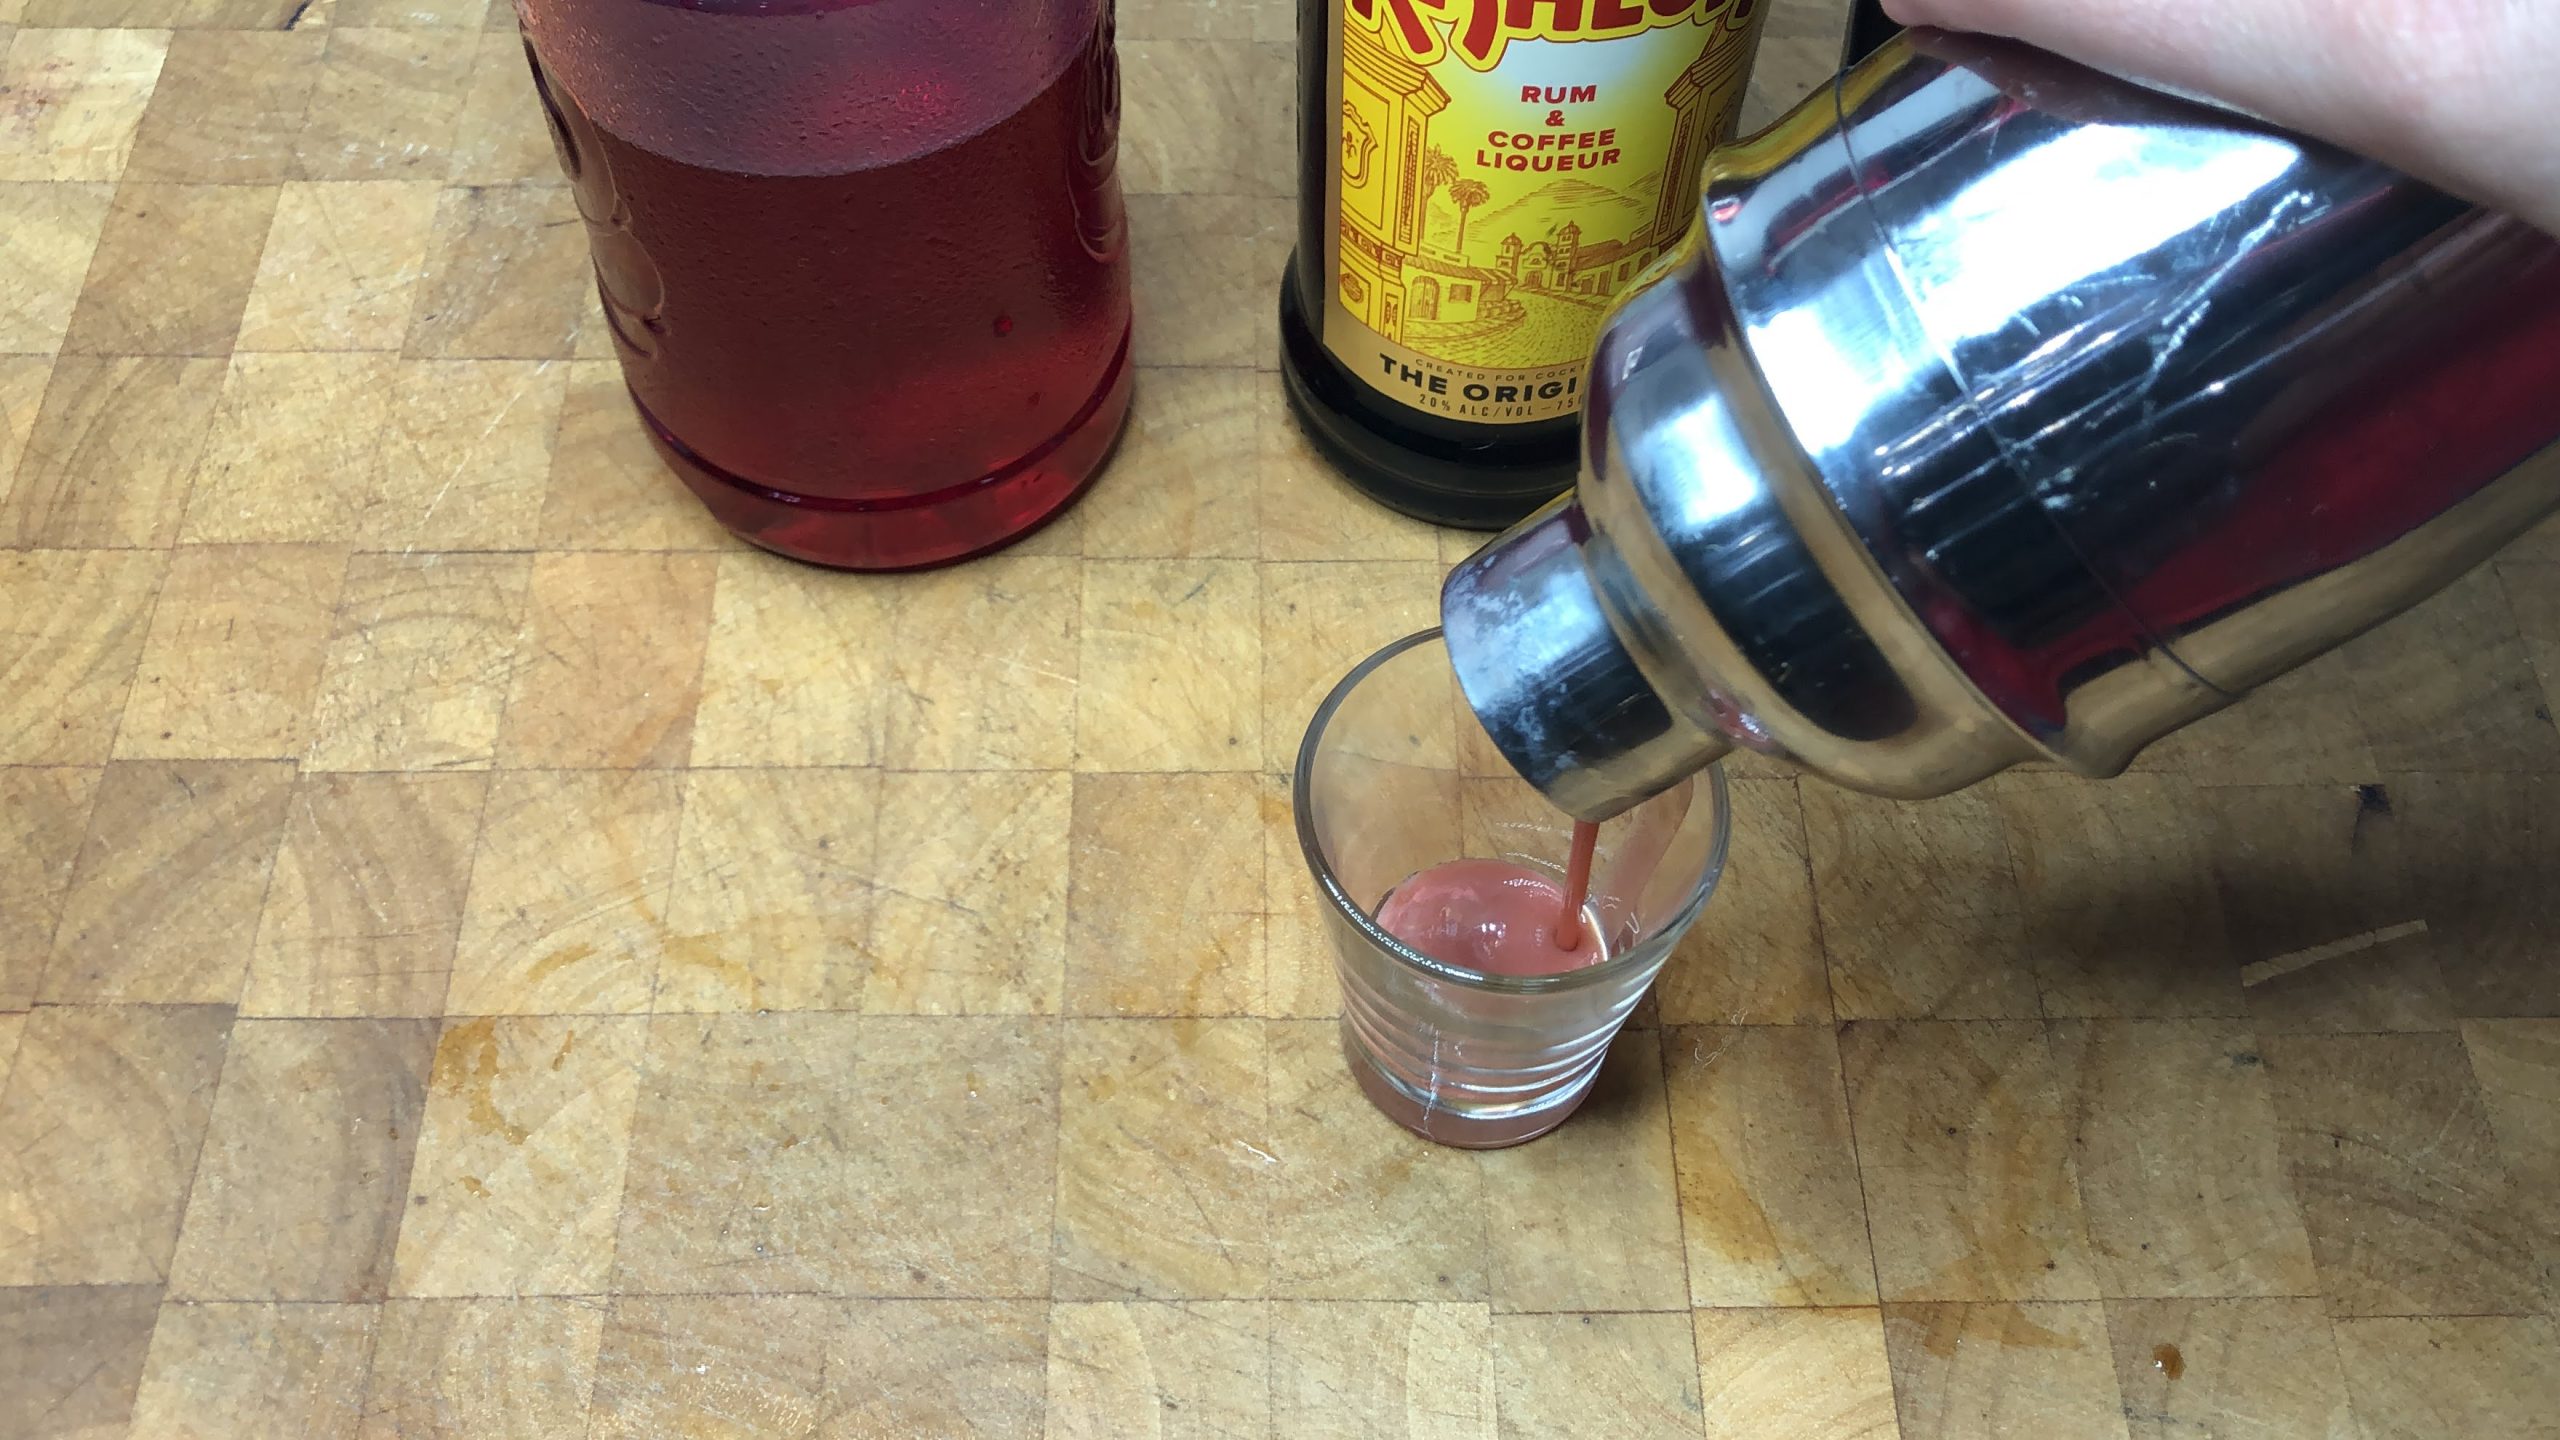 Pouring chocolate covered cherry shot from shaker into a shot glass.